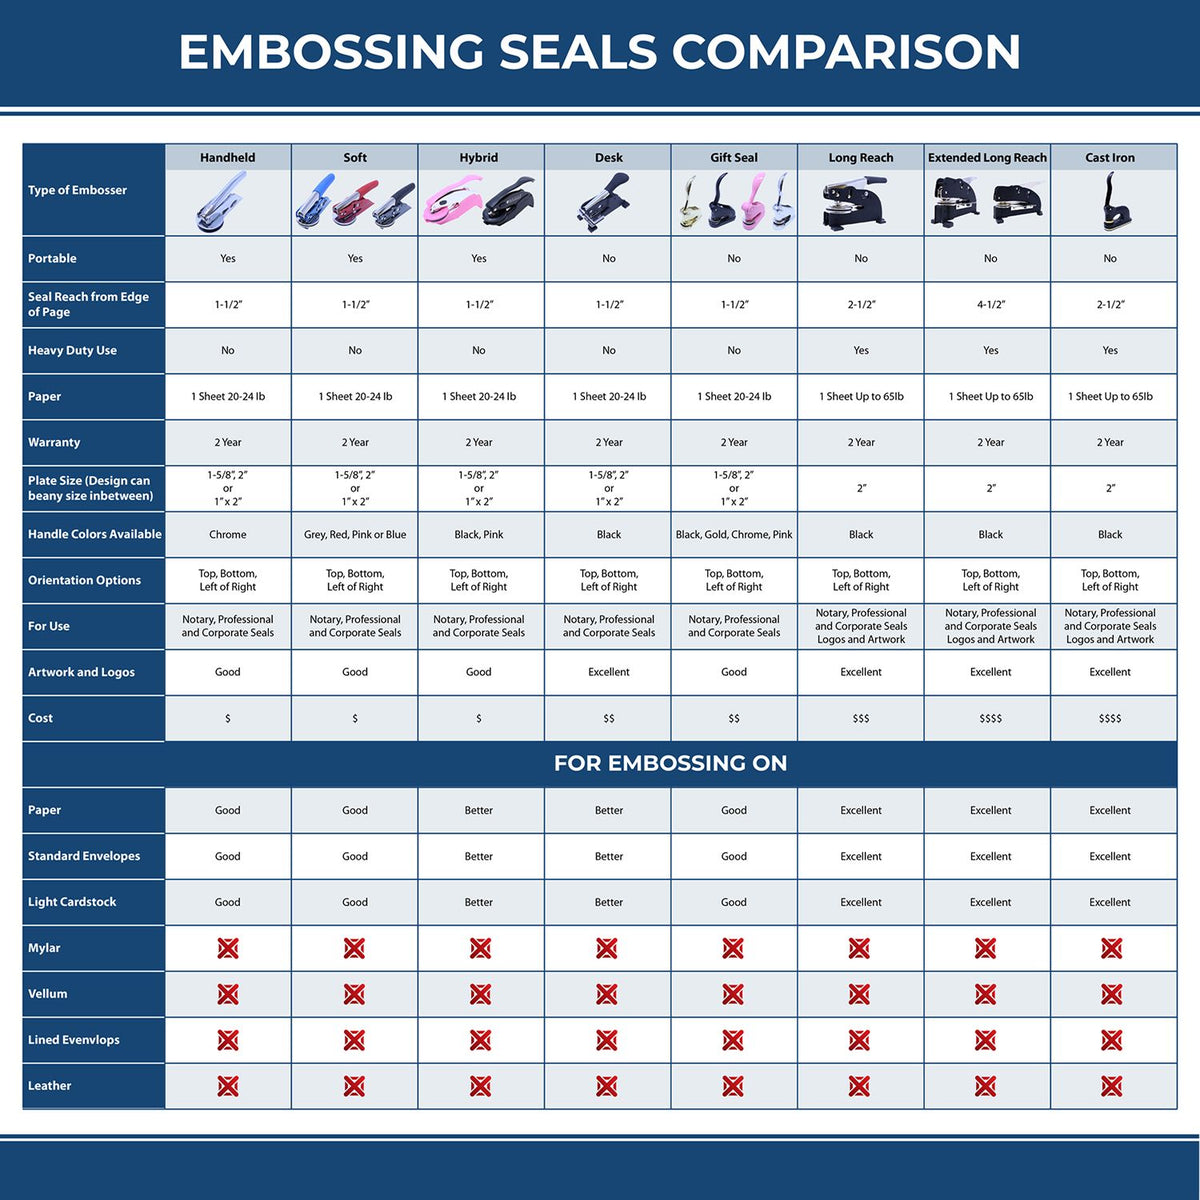 A comparison chart for the different types of mount models available for the Handheld Hawaii Architect Seal Embosser.